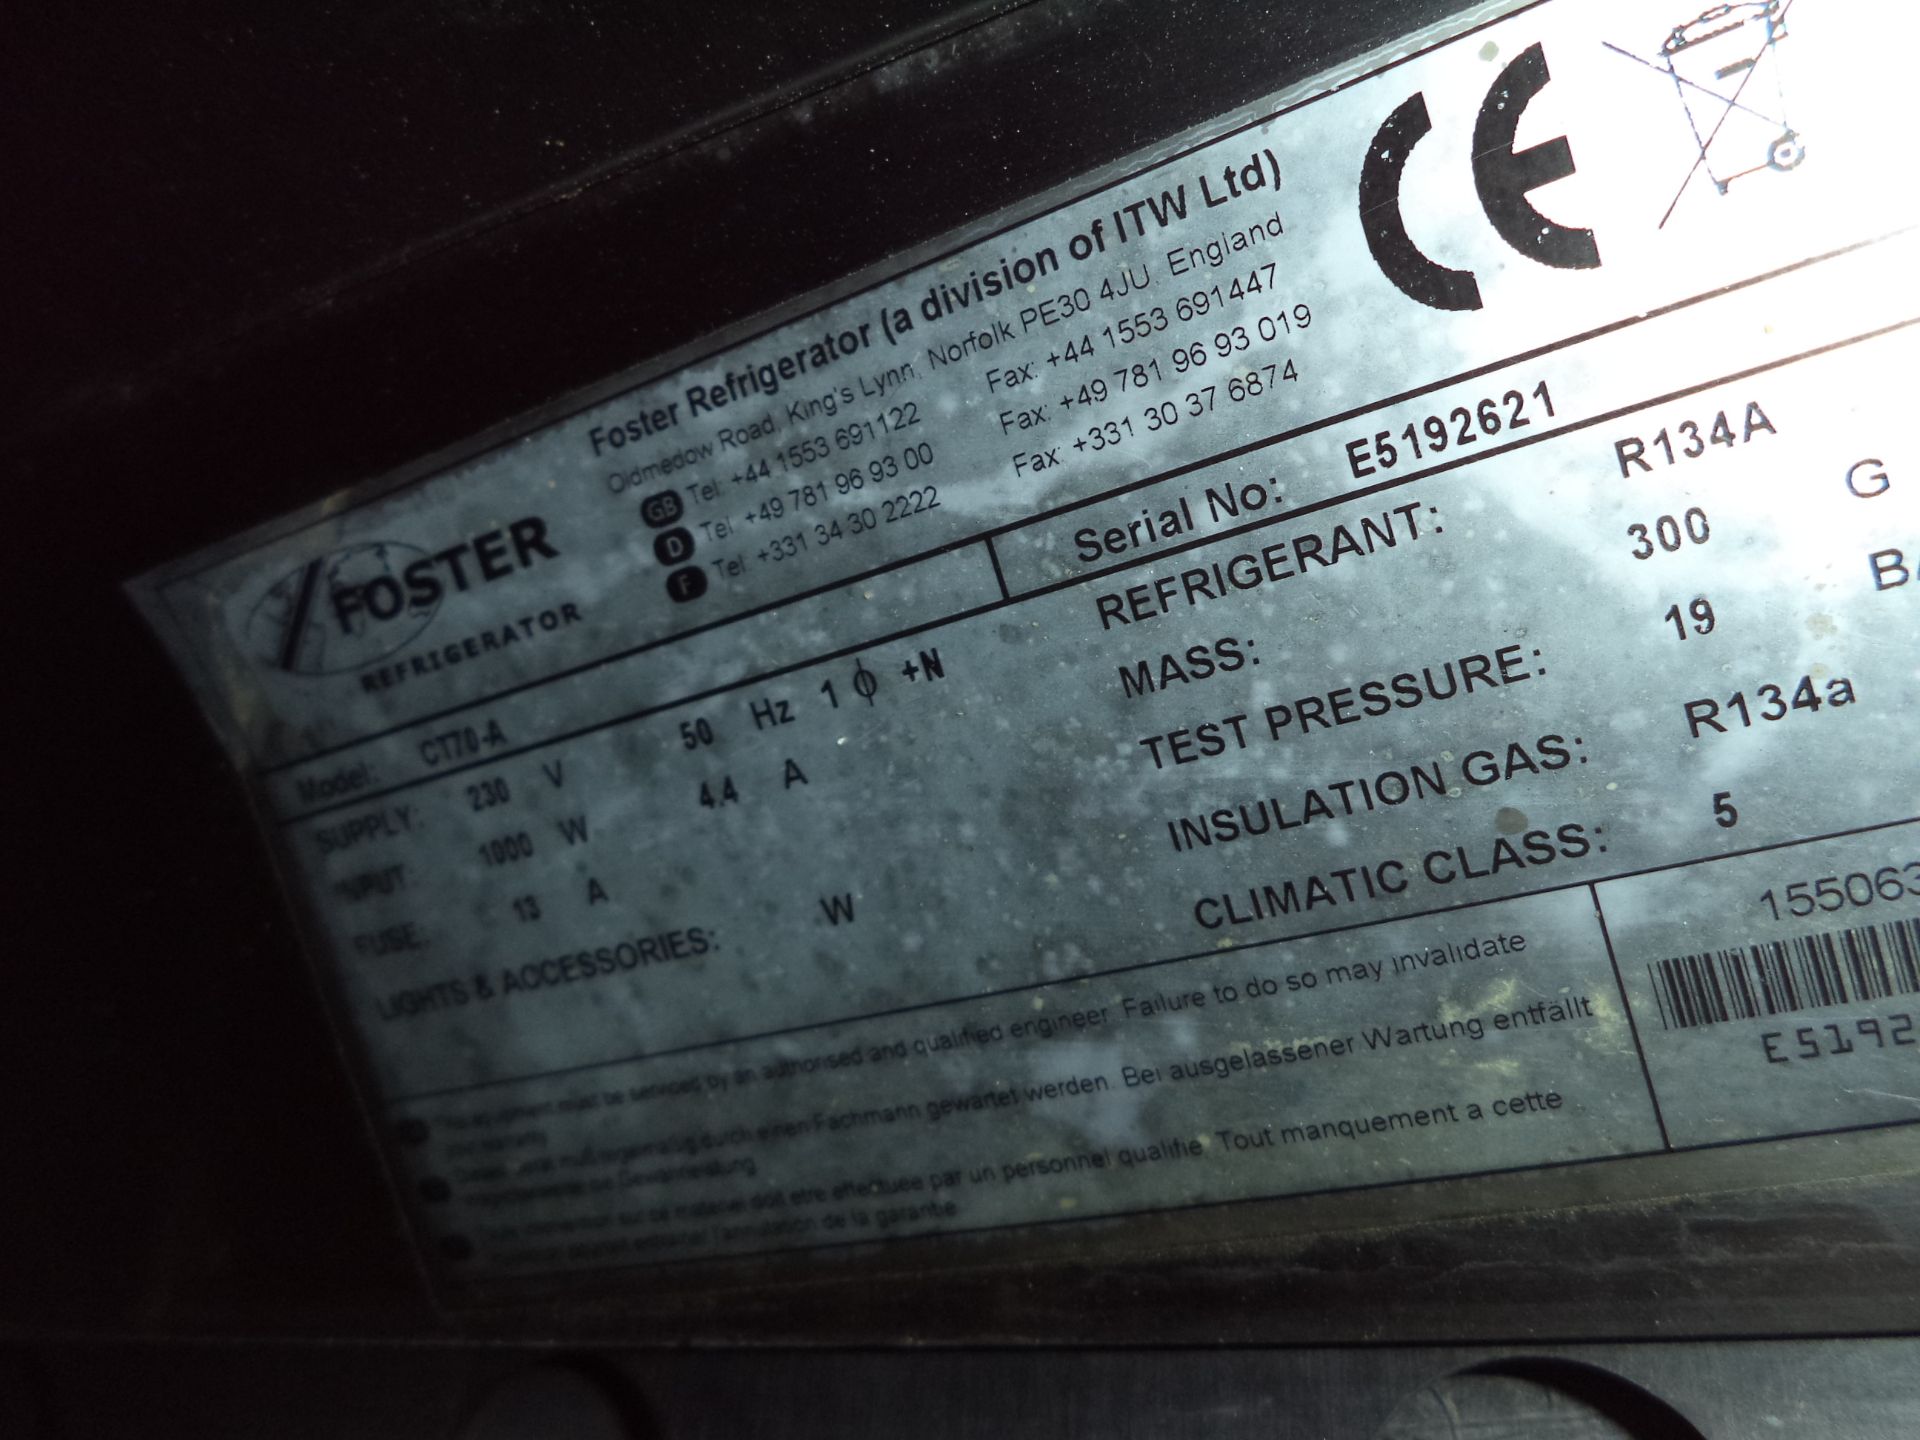 Foster stainless steel tall controlled thaw fridge model CT70-A IMPORTANT: Please remember goods - Image 3 of 5